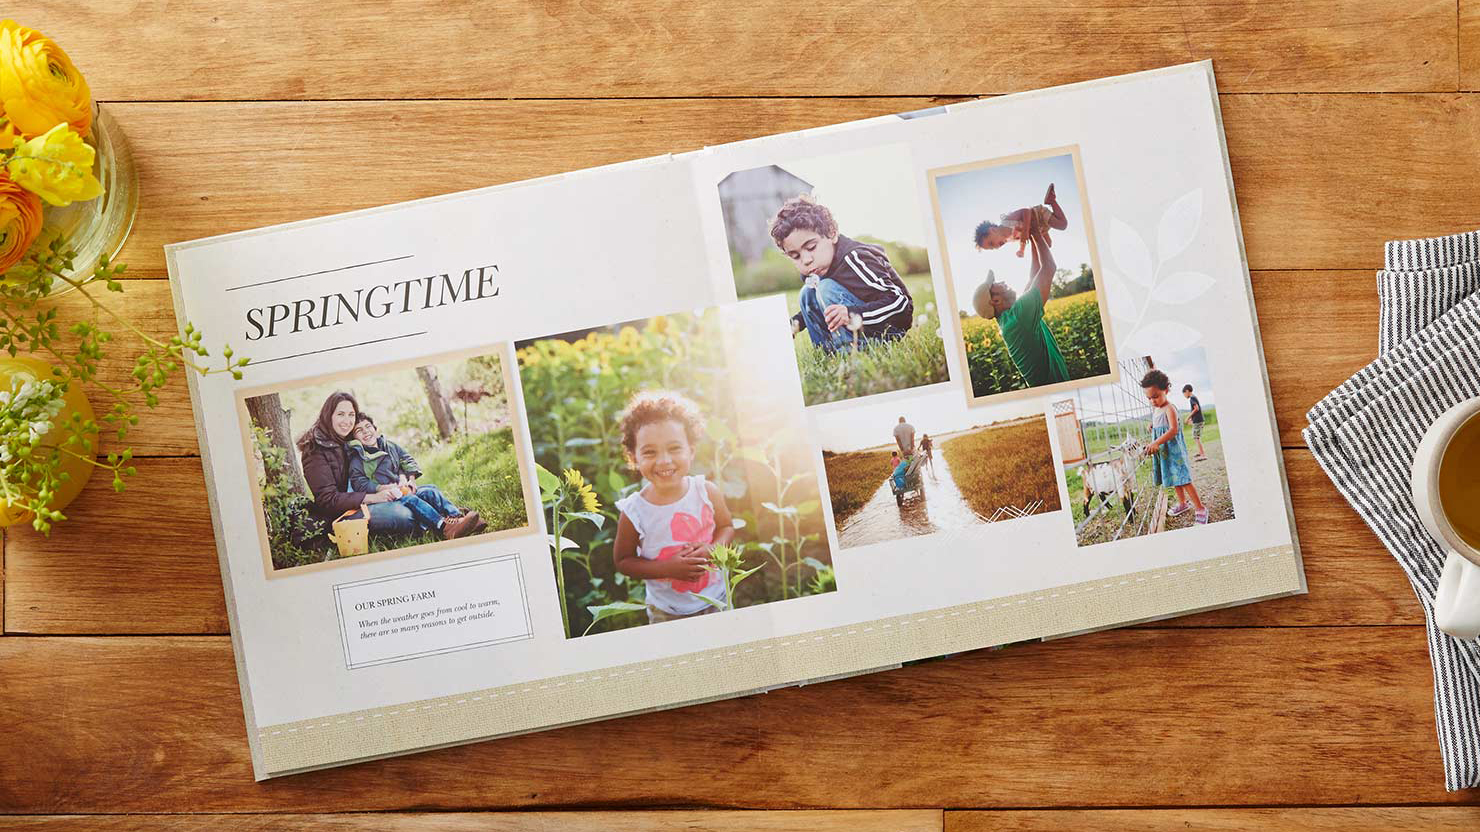 A photo book from Shutterfly